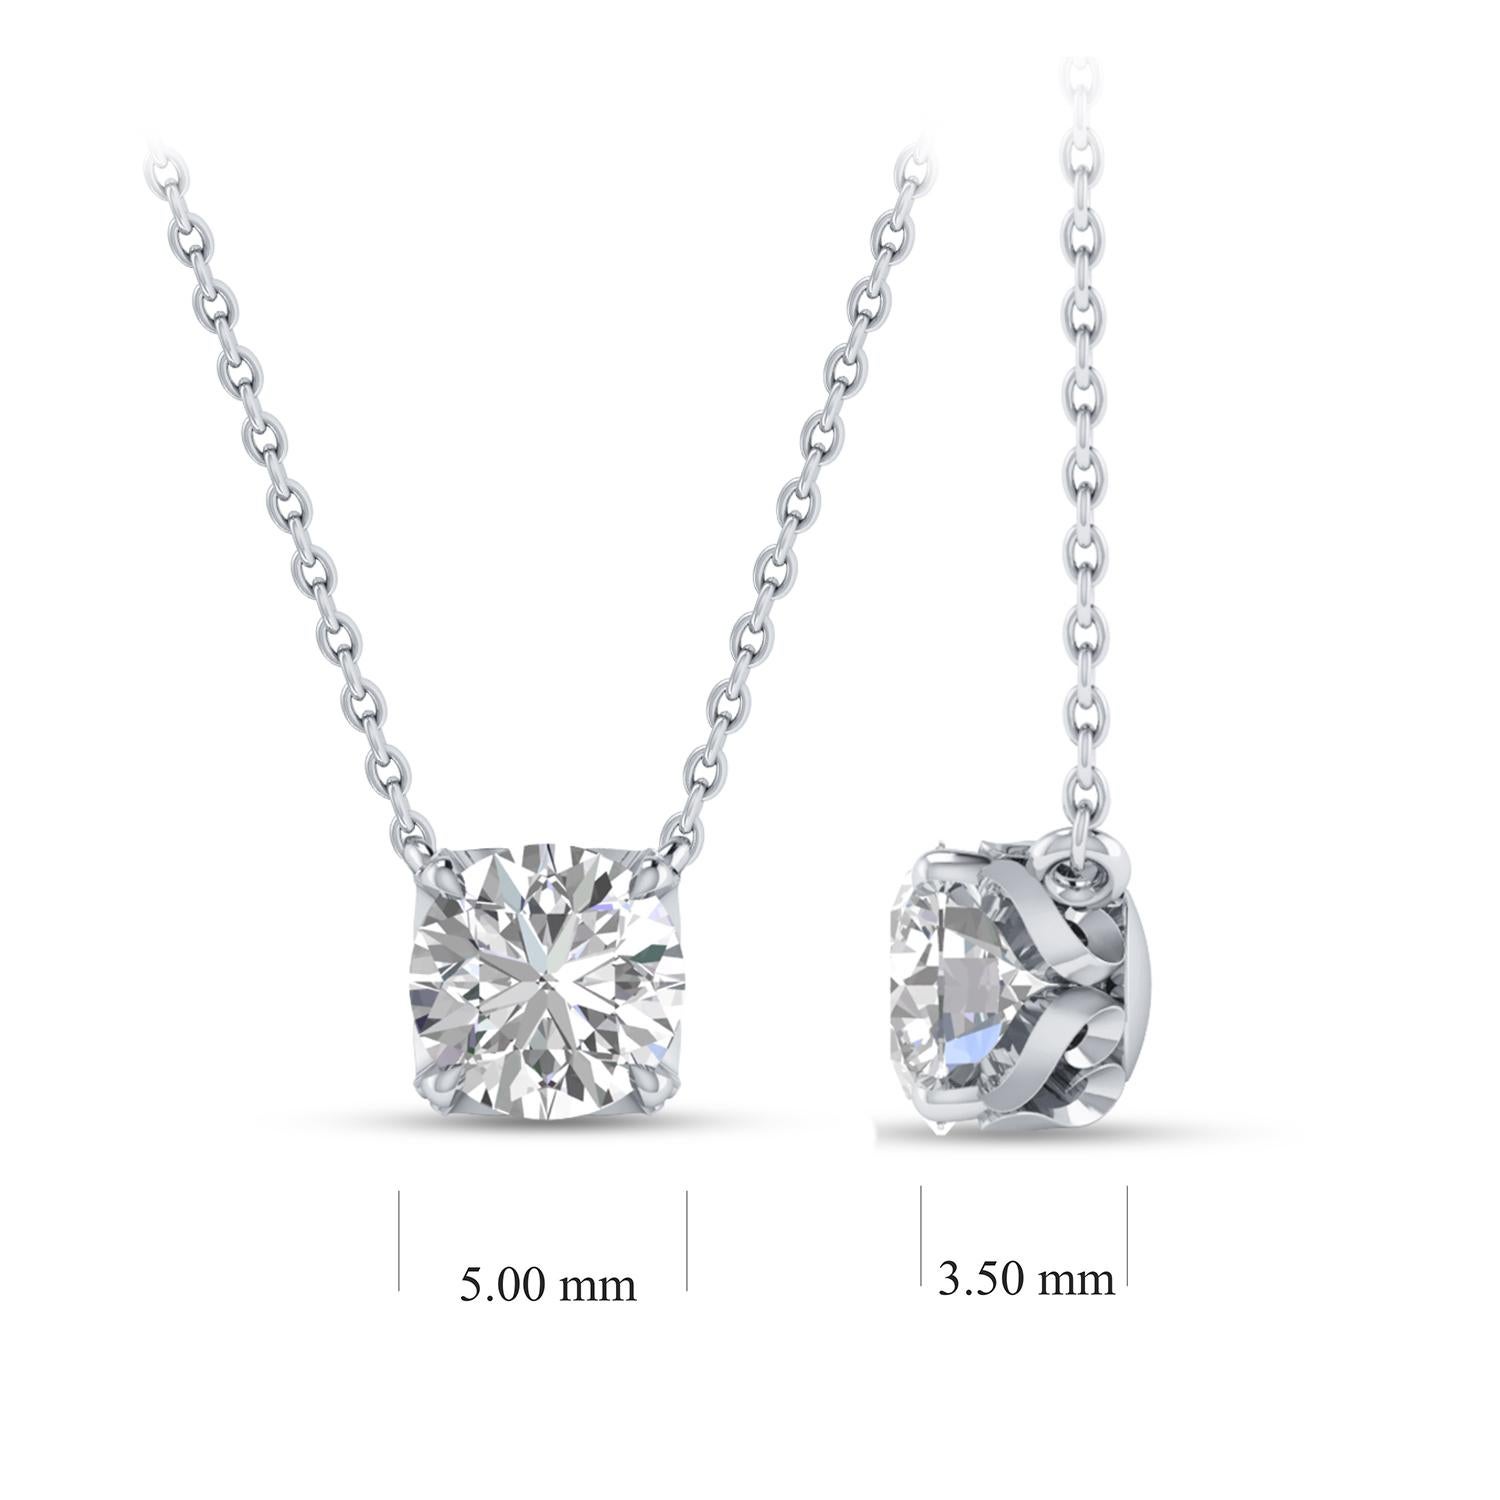  This solitaire diamond necklace features a single, brilliant-cut 0.45 carat diamond in prong setting crafted in 18 KT white gold. This elegant necklace includes 20-inch cable chain with extender at 18-inch. 

(Carat weights may vary slightly due to